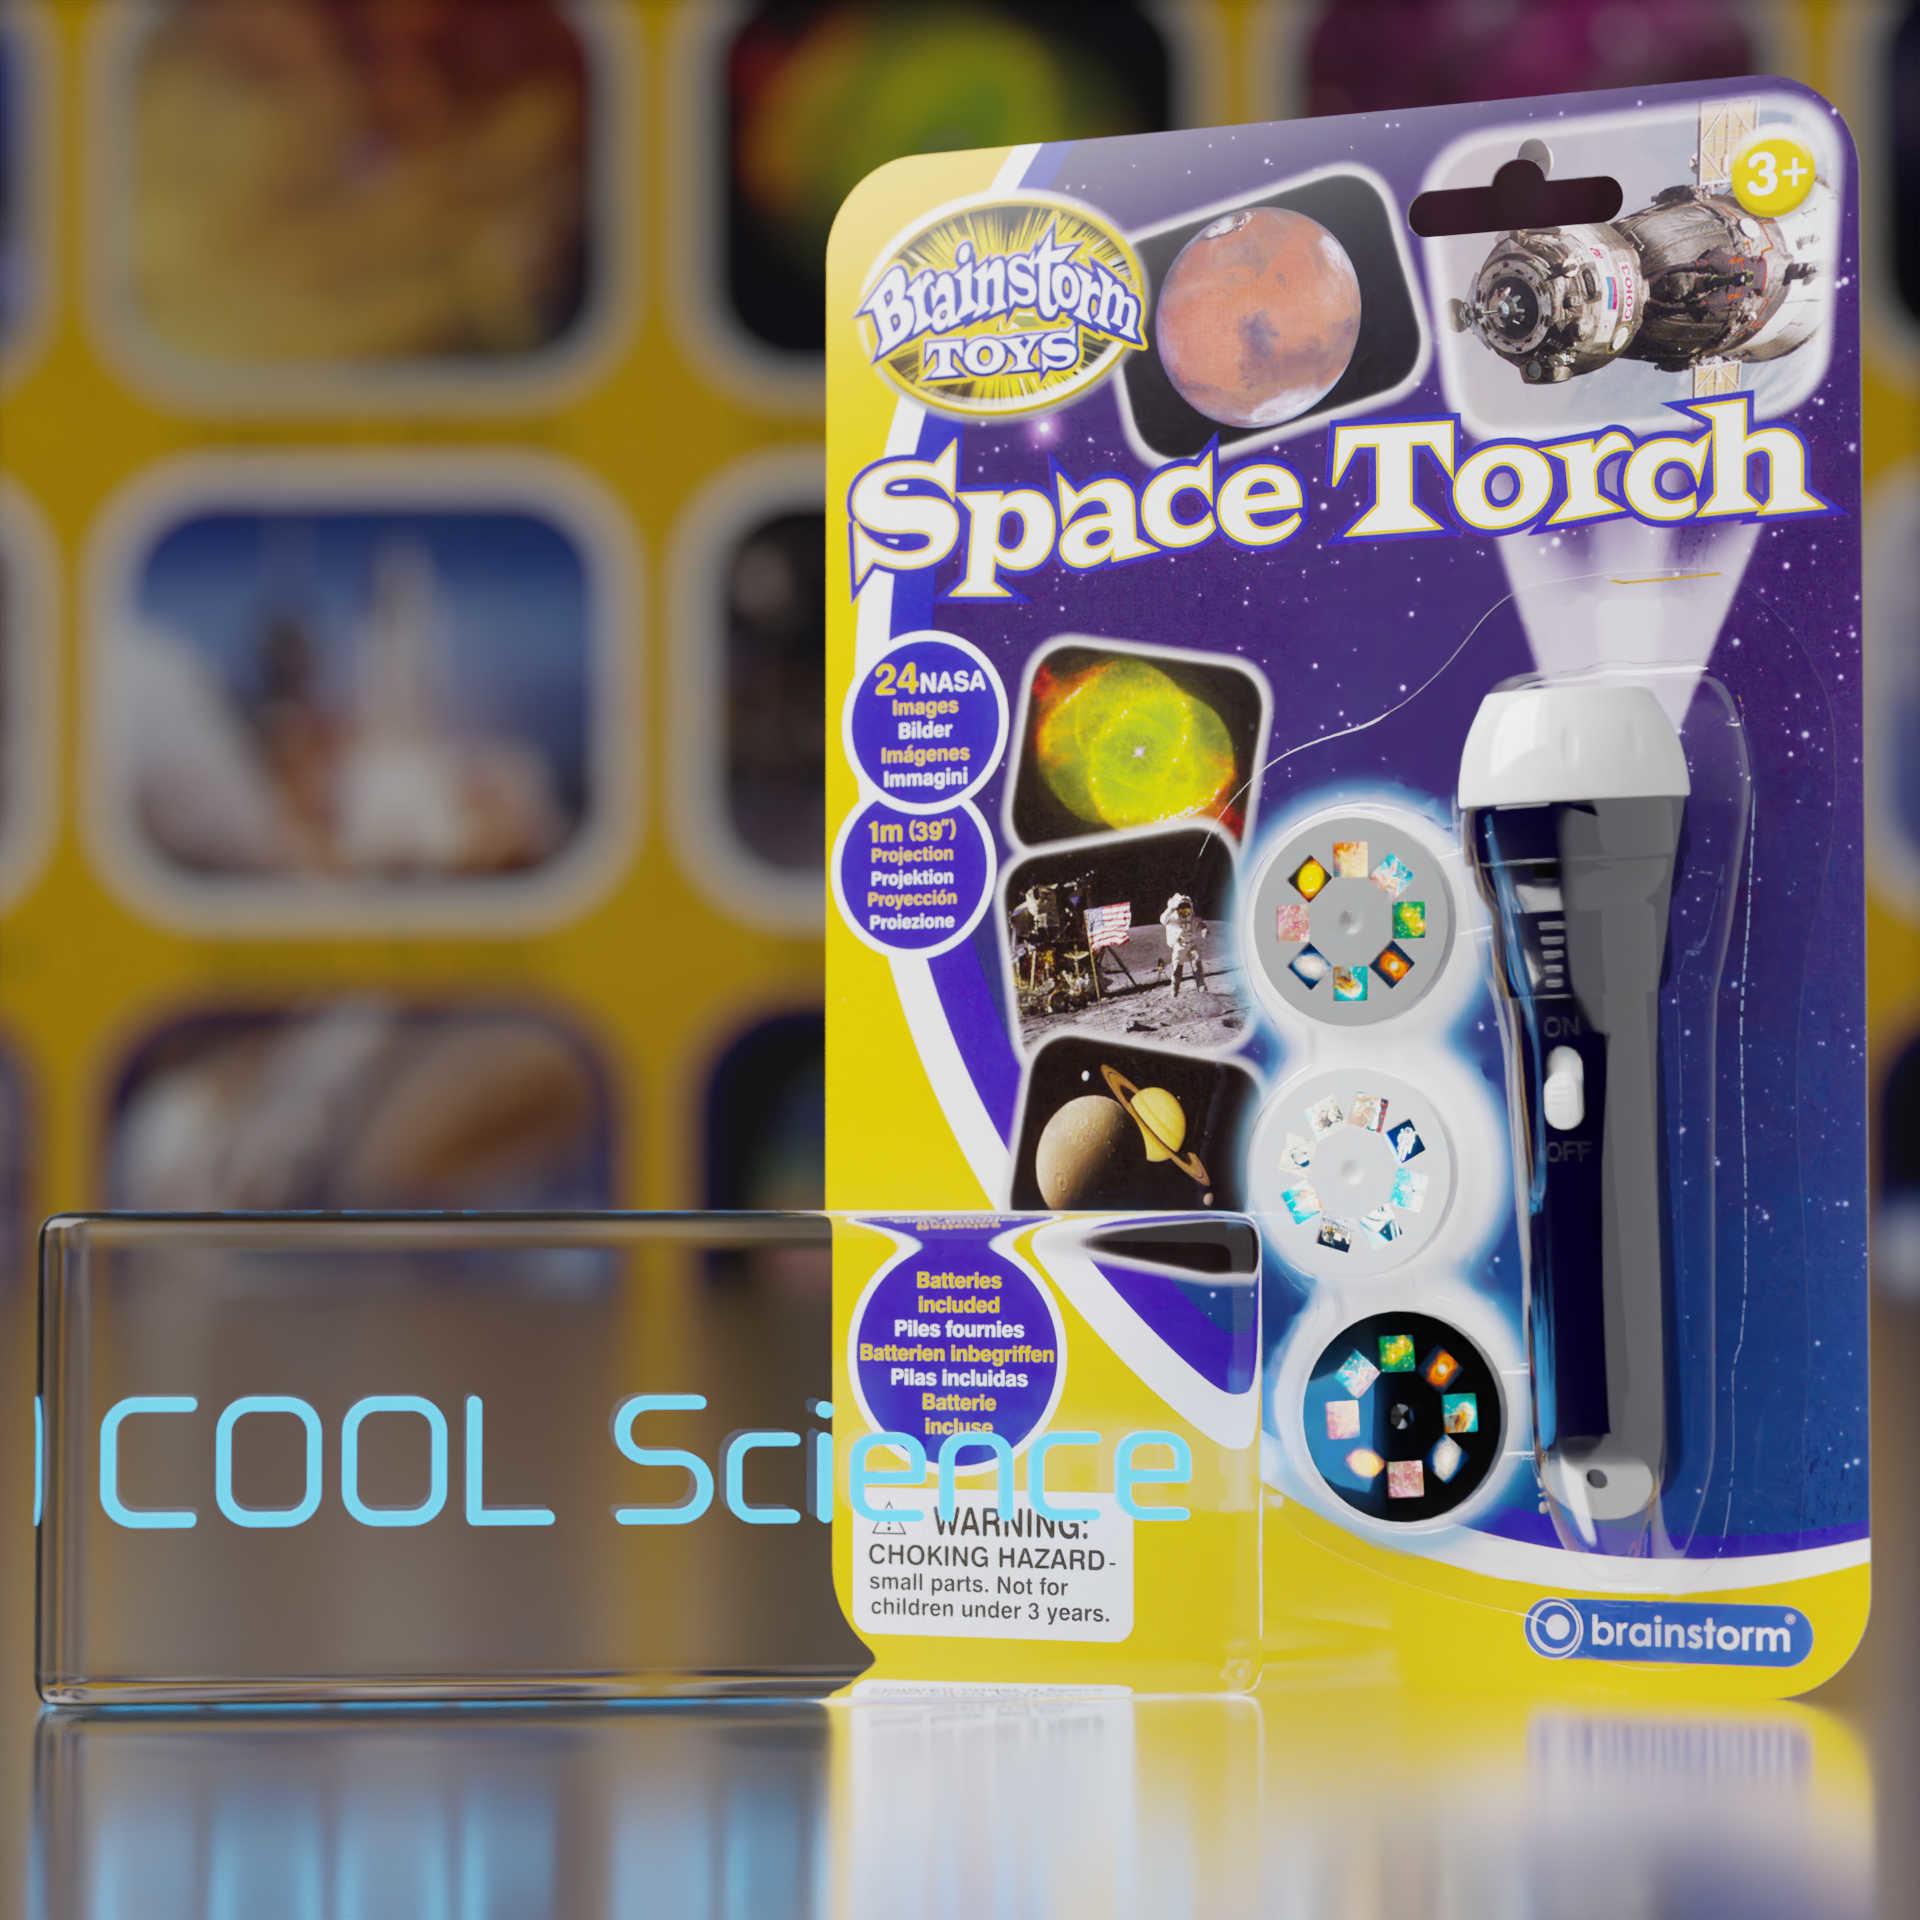 Front View of the Brainstorm Toys SpaceTorch and Projector on it’s backing card